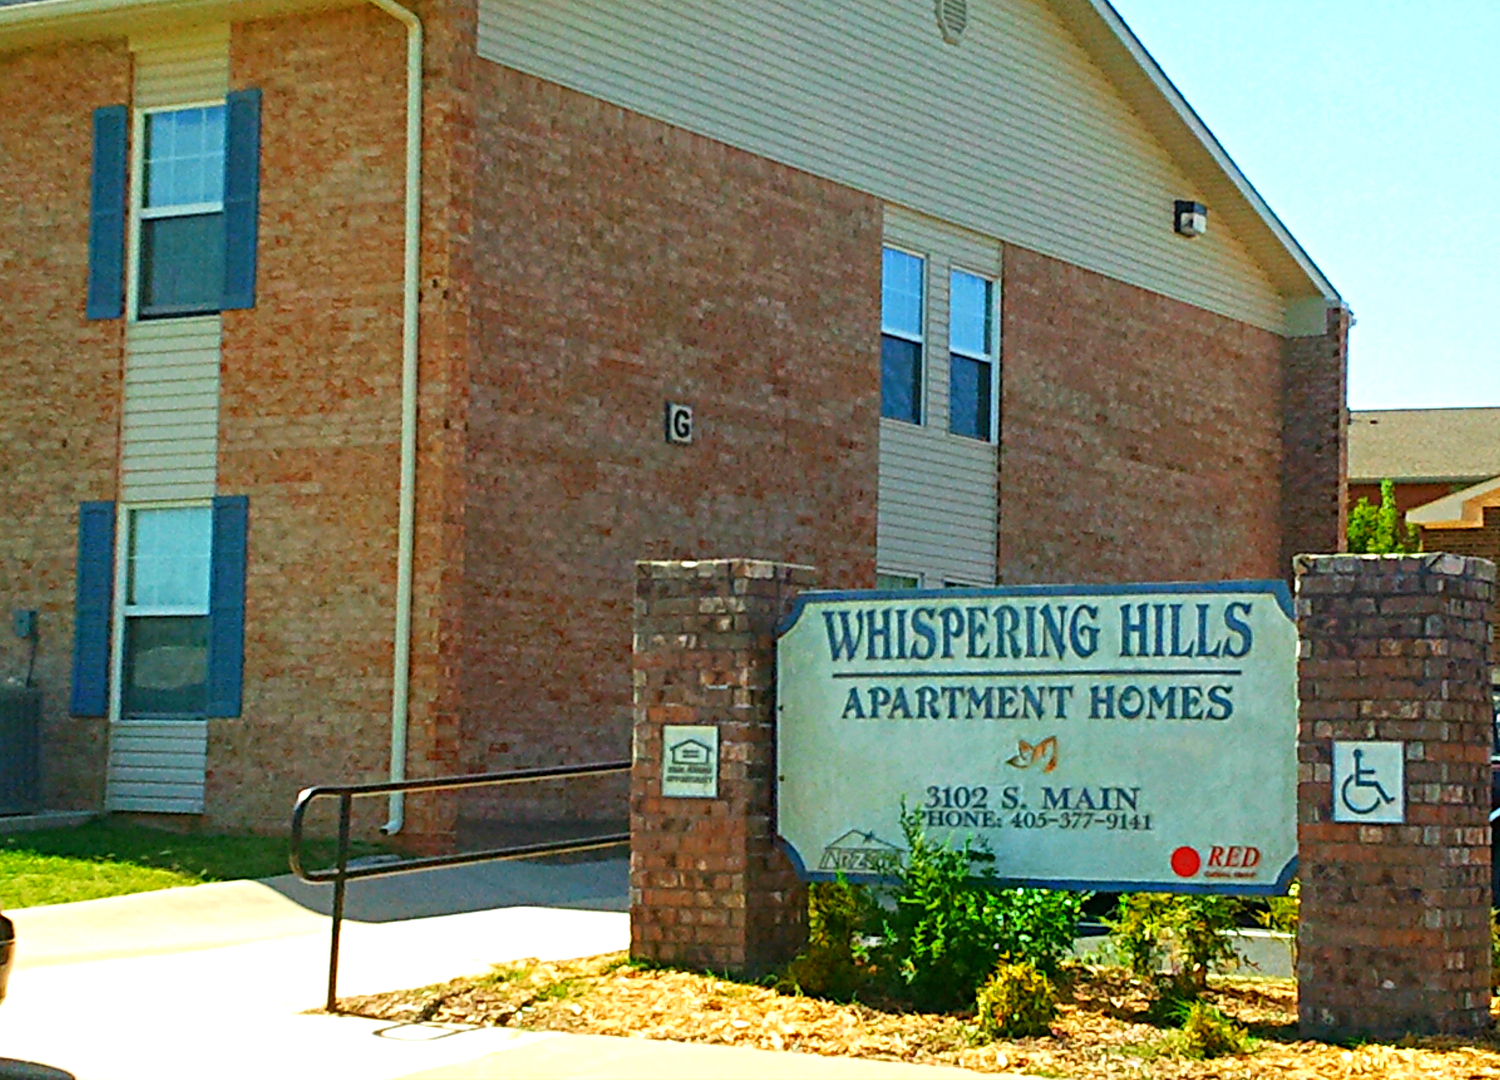 WHISPERING HILLS APARTMENTS